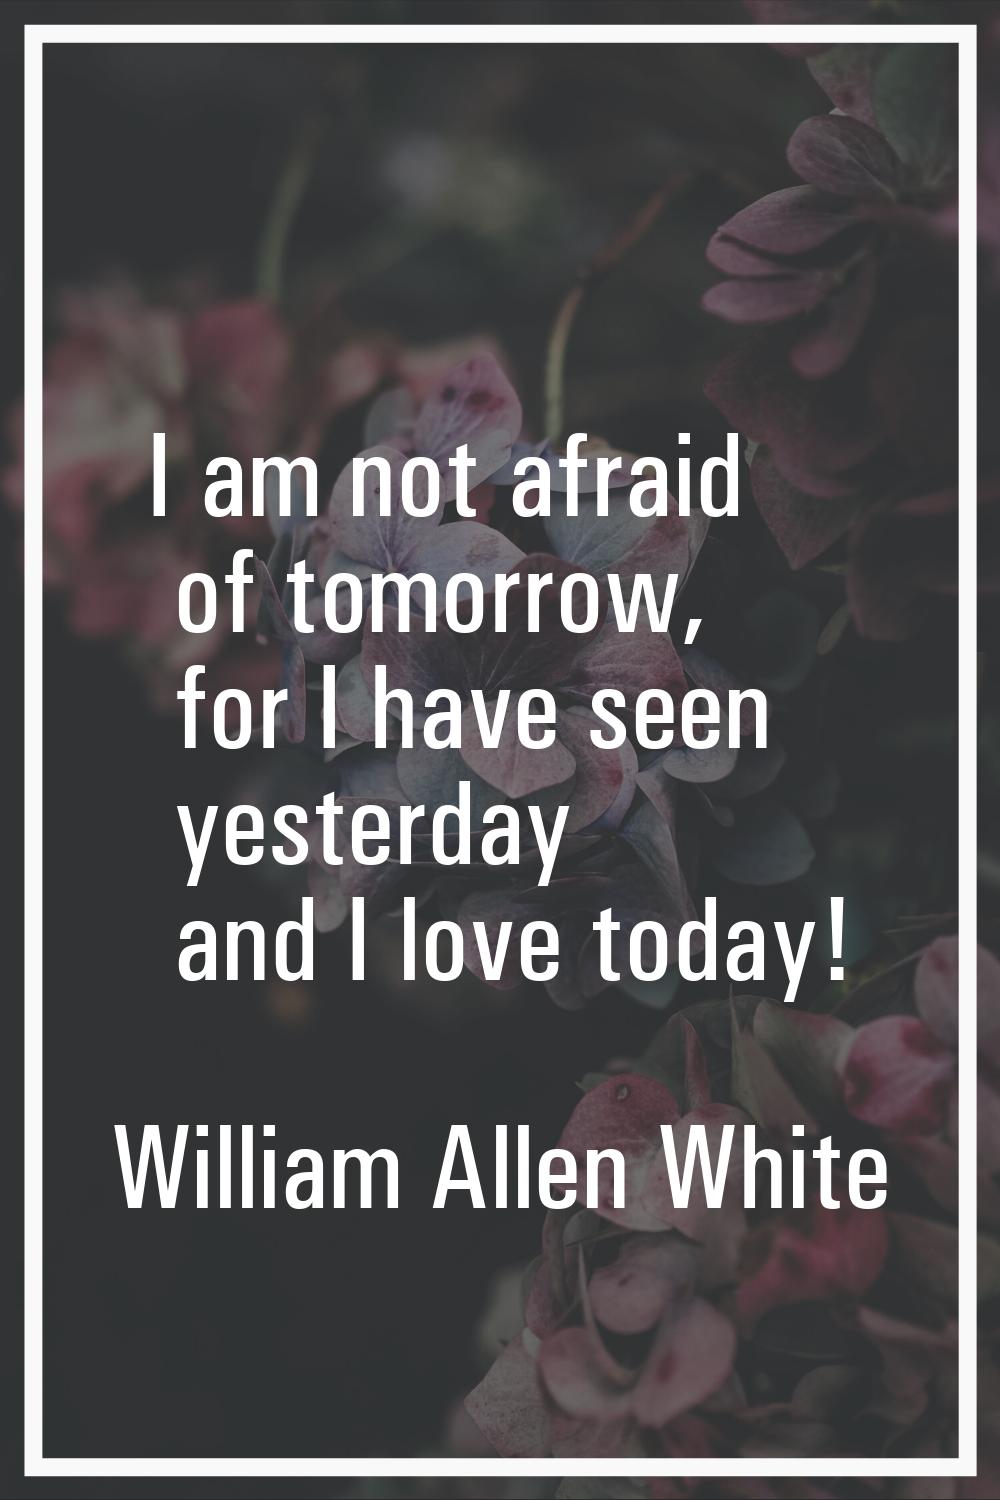 I am not afraid of tomorrow, for I have seen yesterday and I love today!